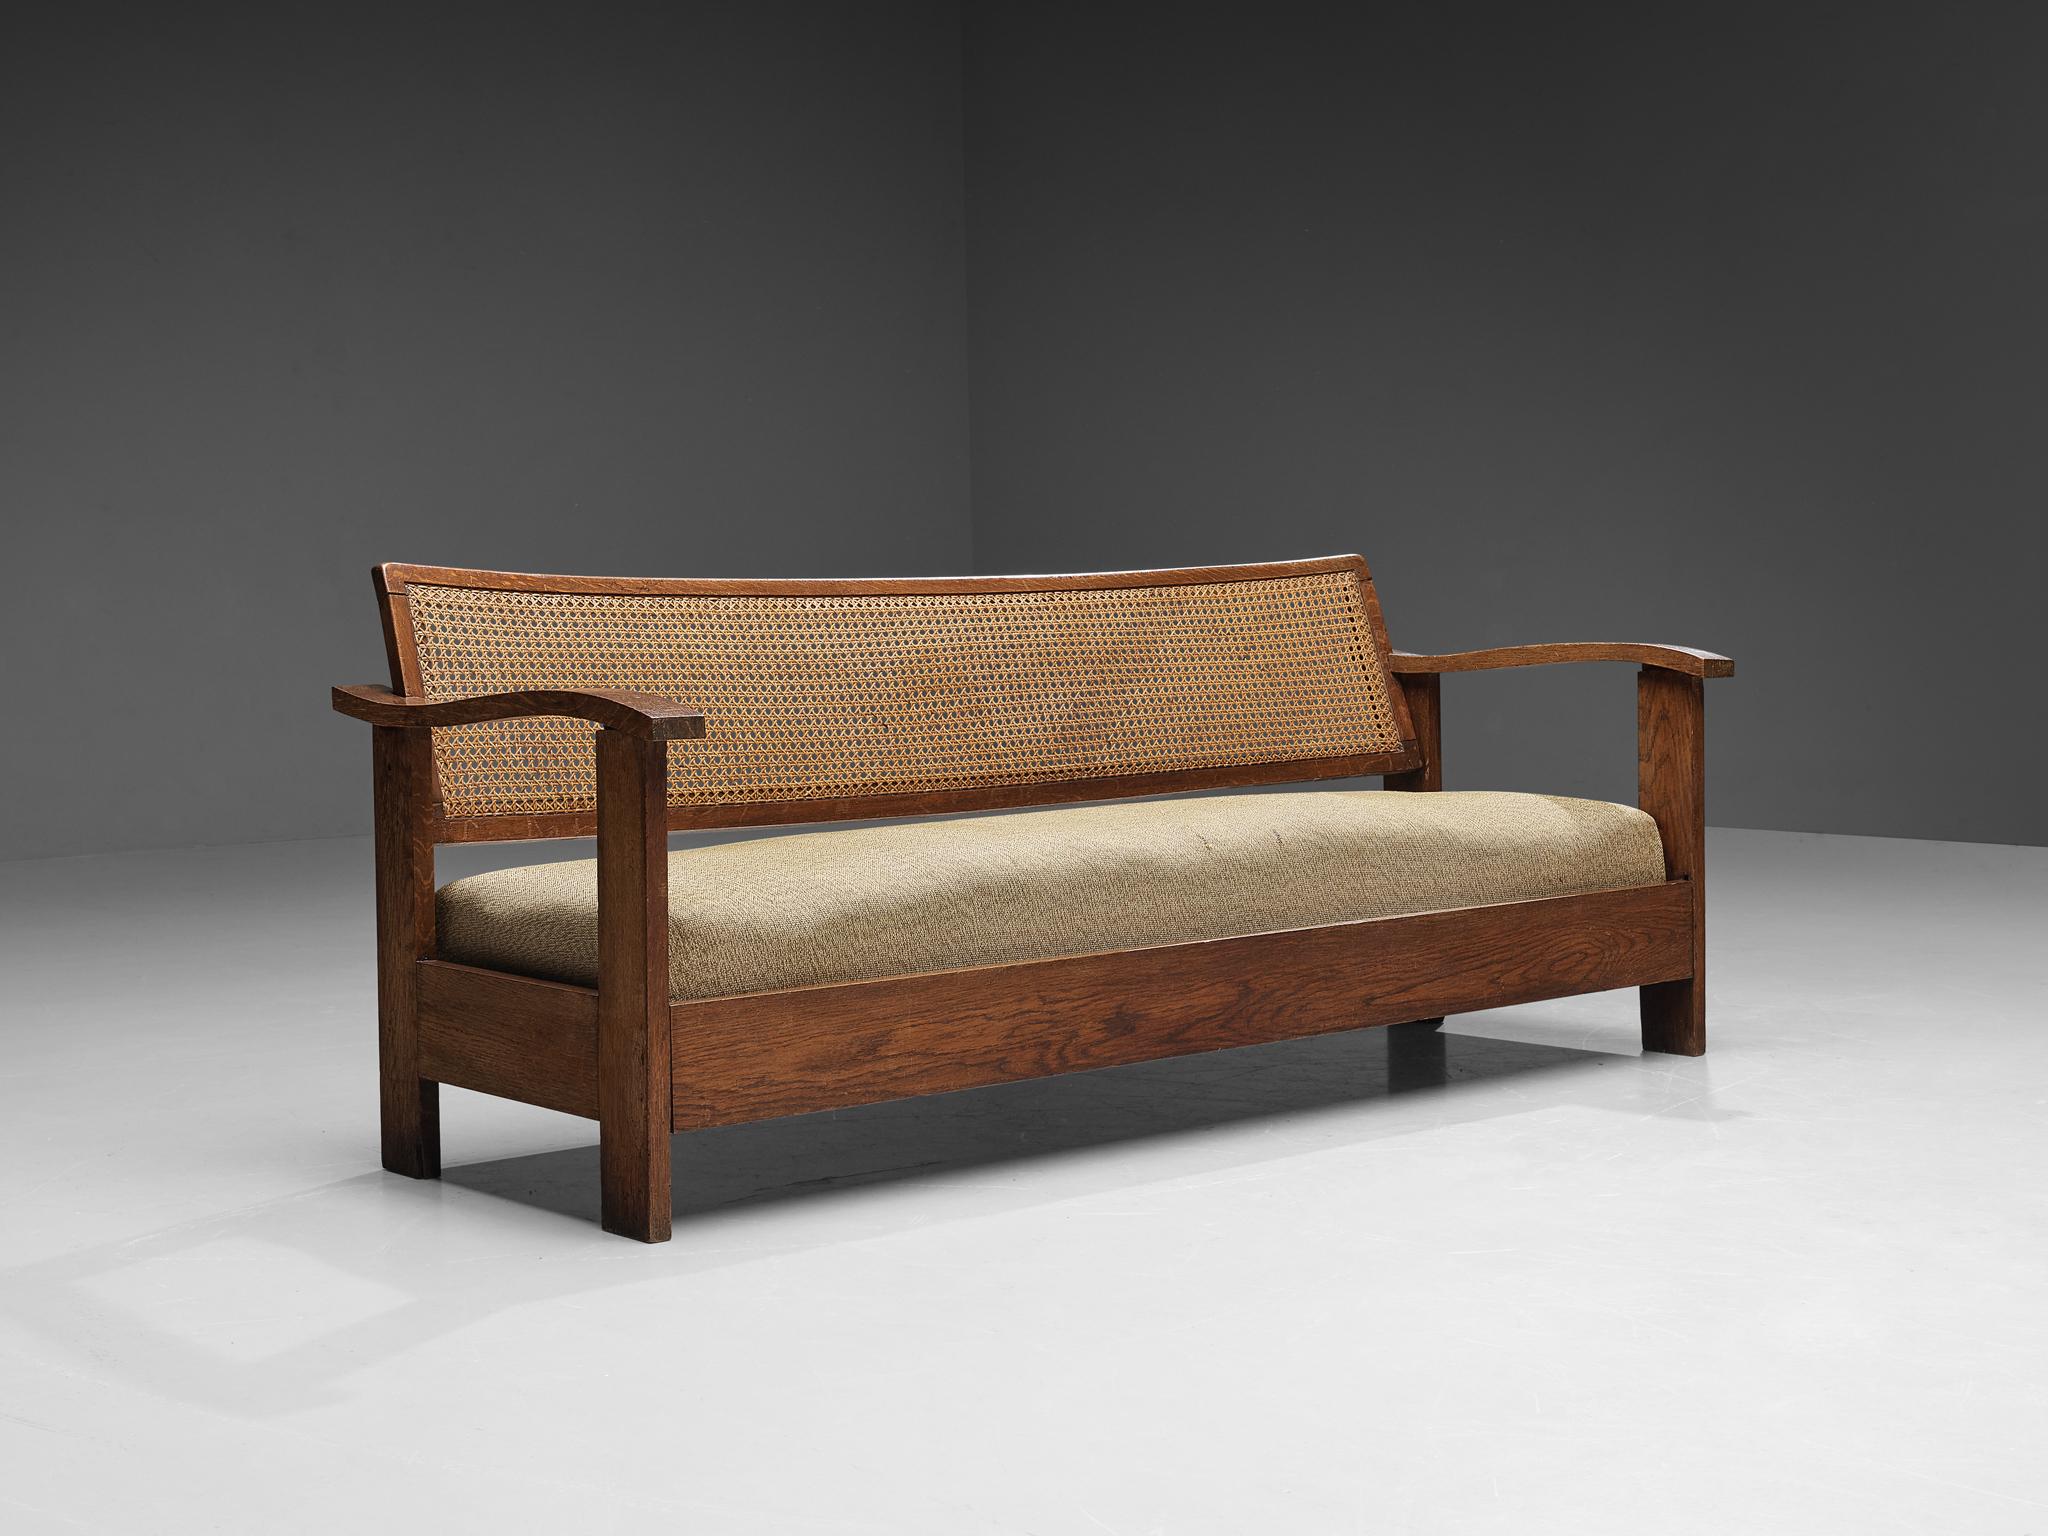 Josep Palau Oller, sofa, oak, cane wicker, fabric, Spain, 1930s. 

Beautifully constructed sofa of Spanish origin designed by Josep Palau Oller (1888-1961). The design embodies an evolved rustic character with great quality of elegance. The backrest